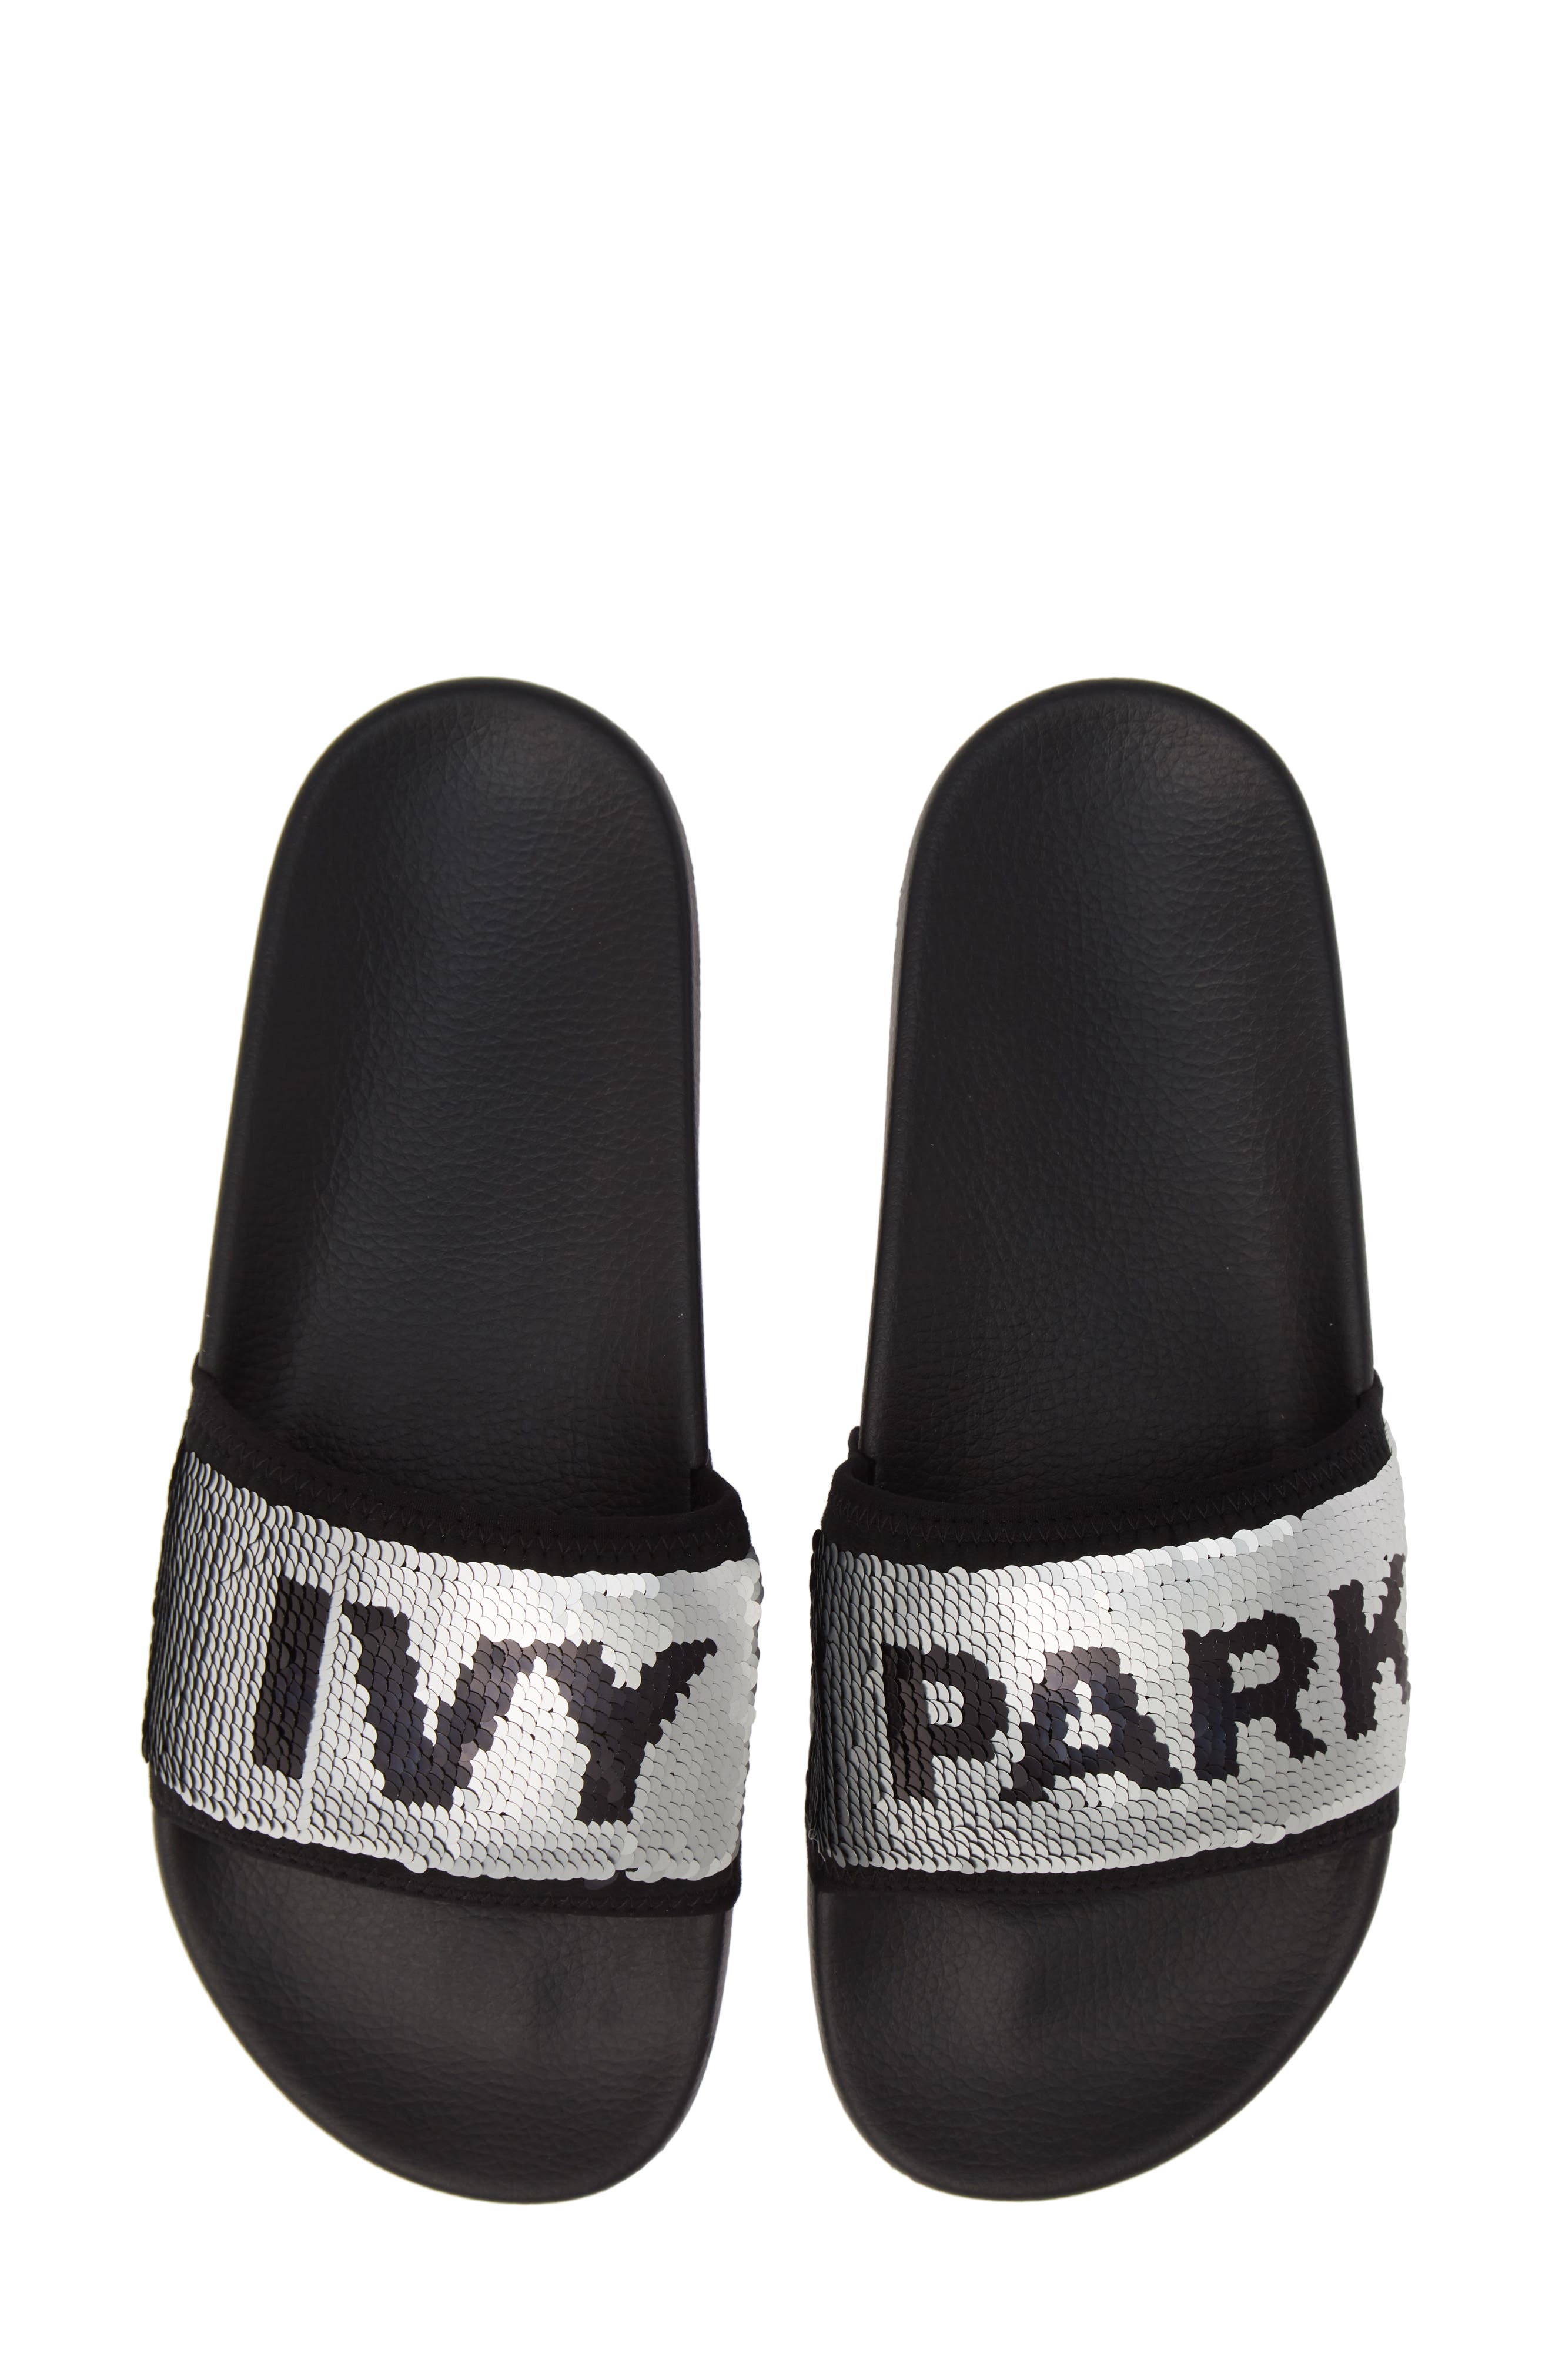 ivy park slippers sale